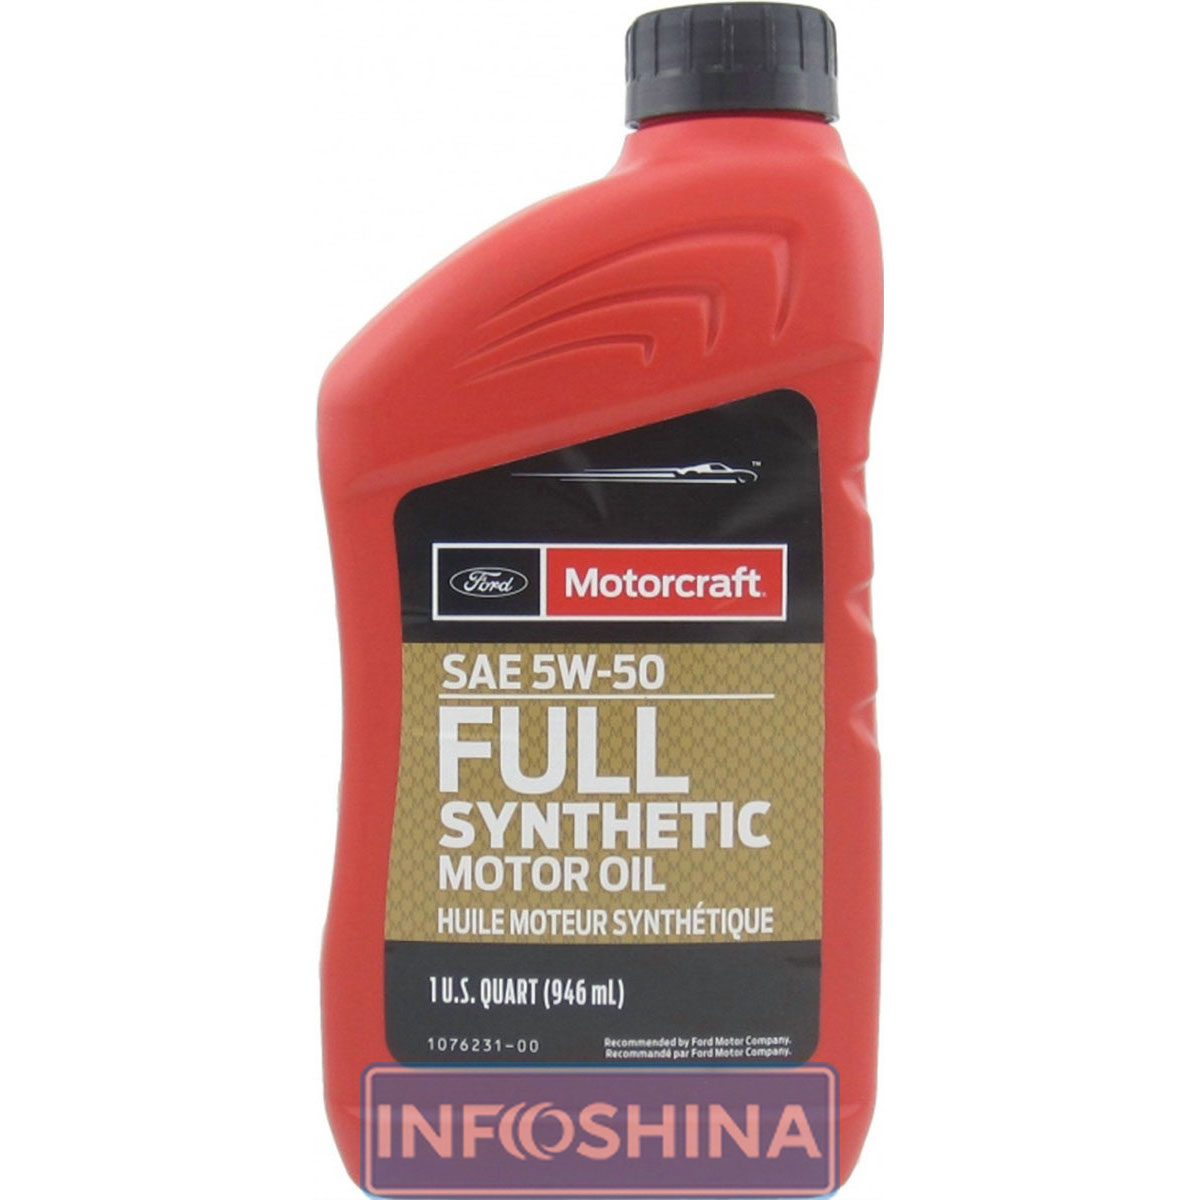 Купити масло Ford Motorcraft Full Synthetic 5W-50 (0.946 л)